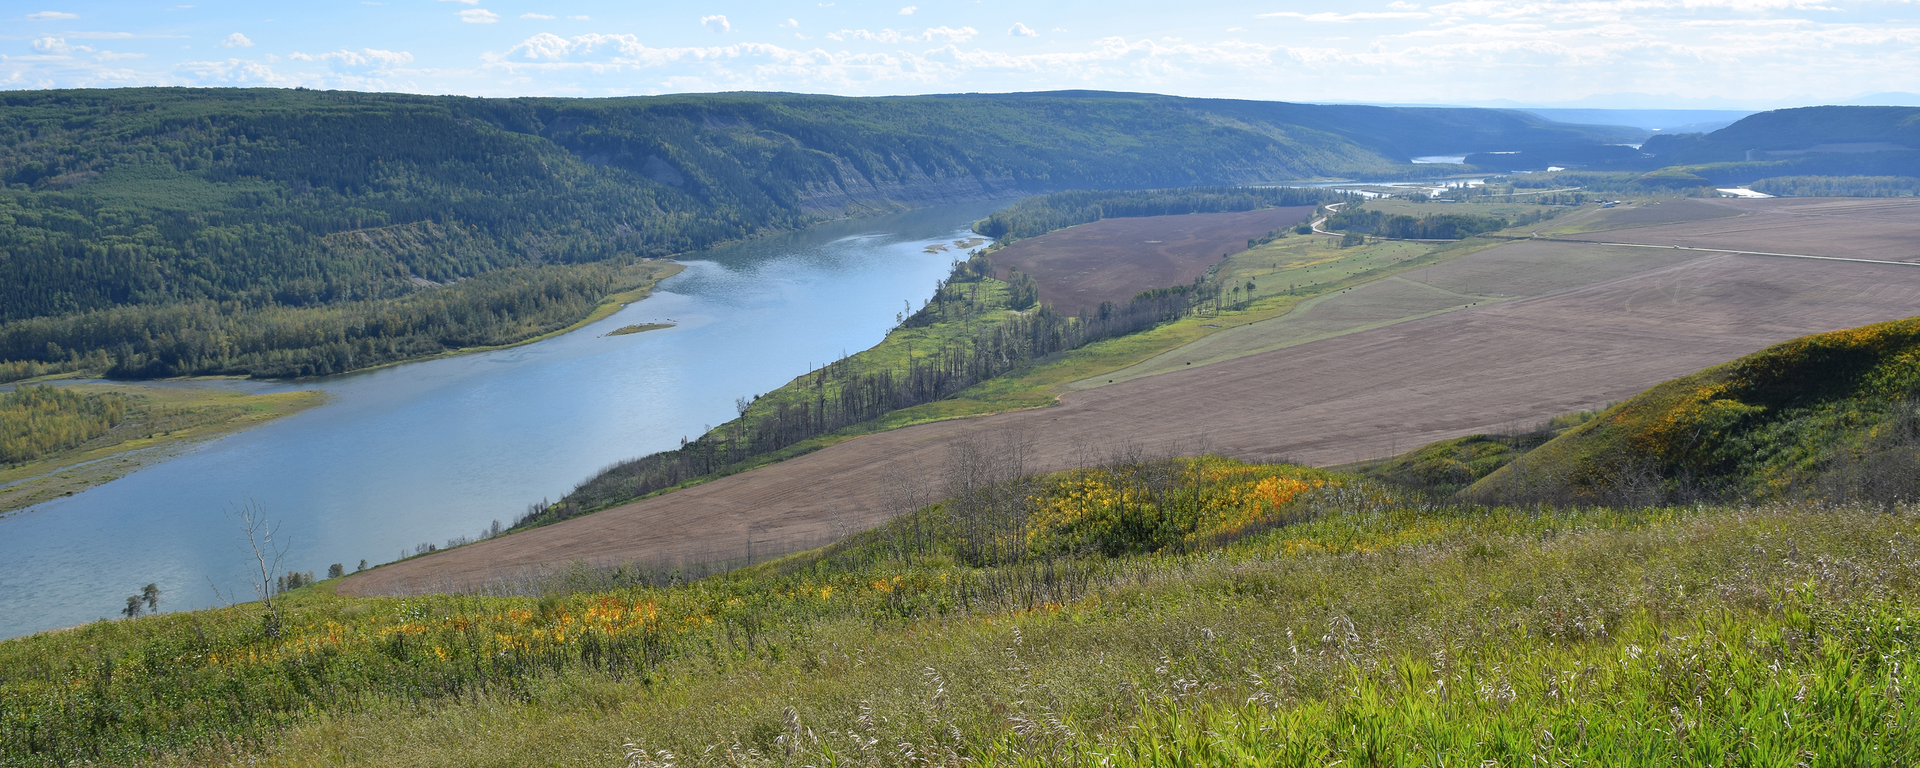 Peace River Valley in northern British Columbia.